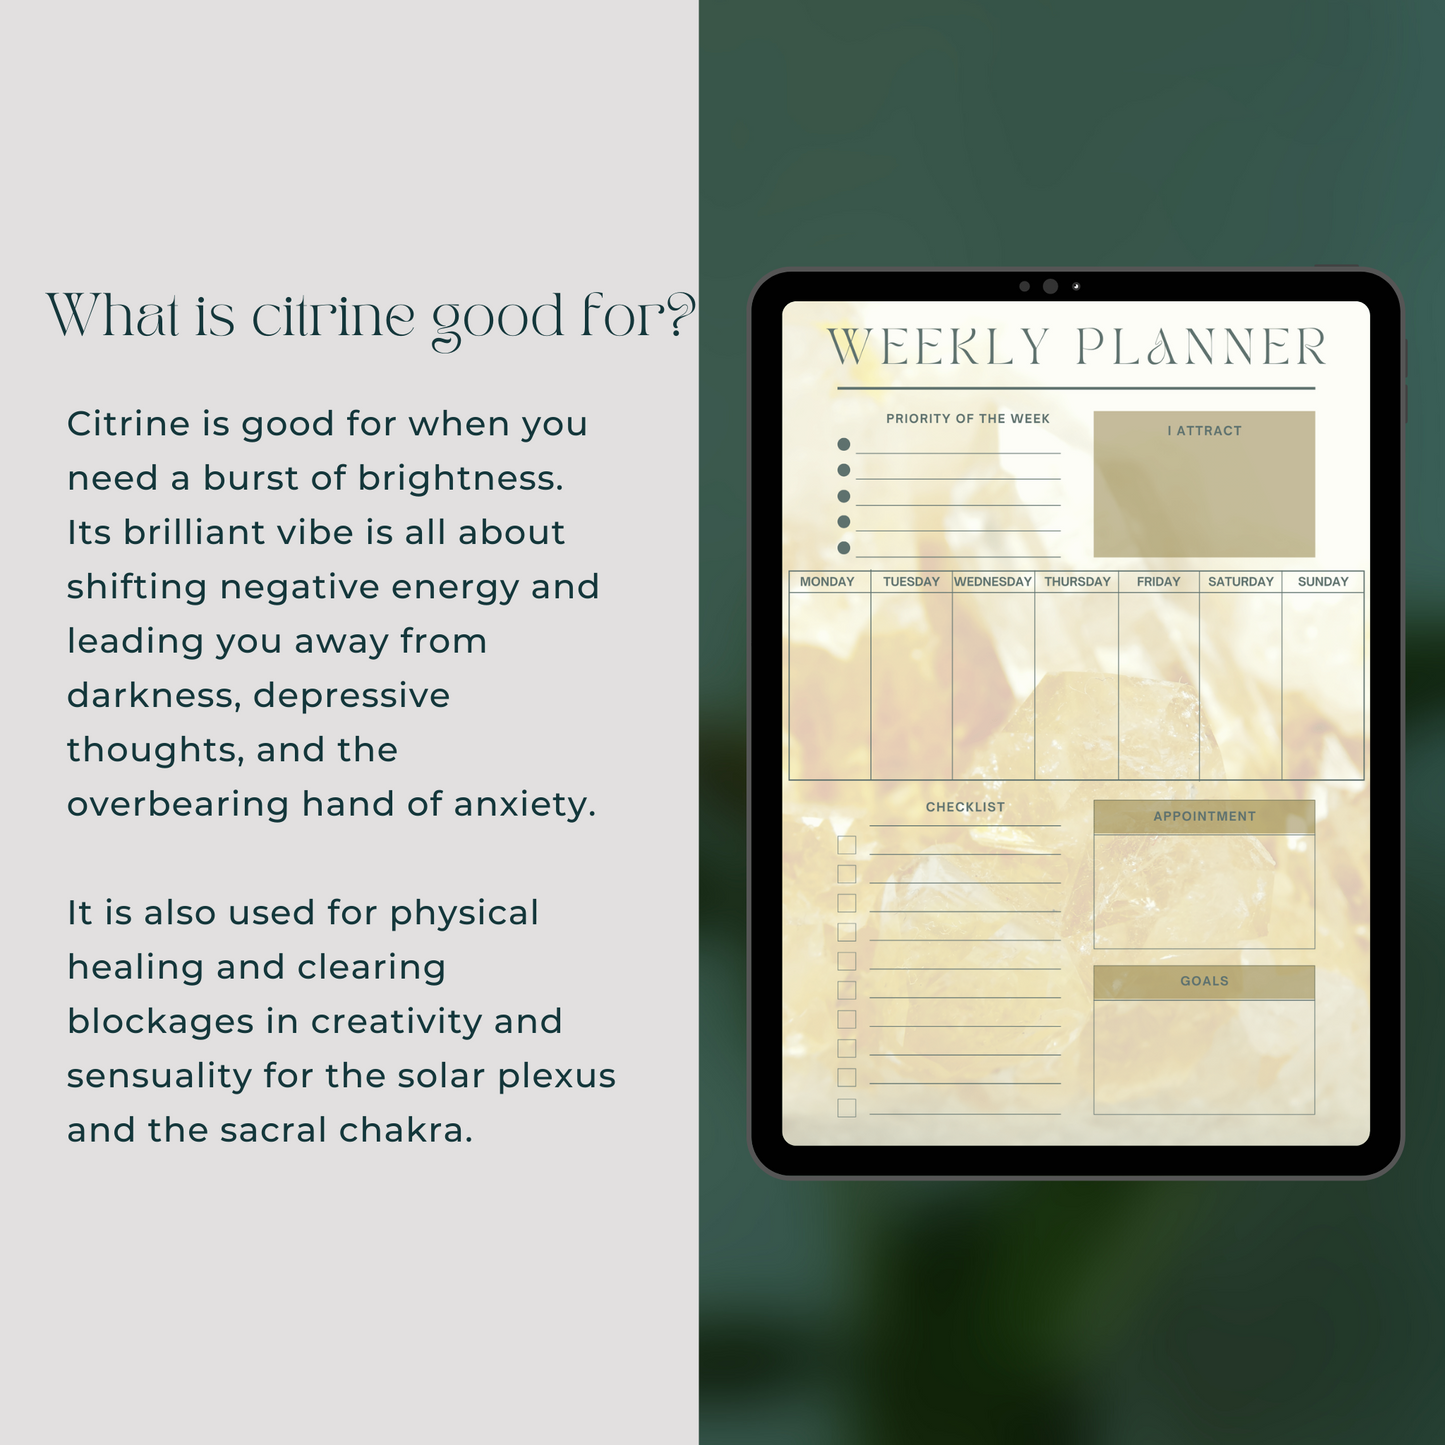 Daily Weekly Monthly Planner Set - Citrine